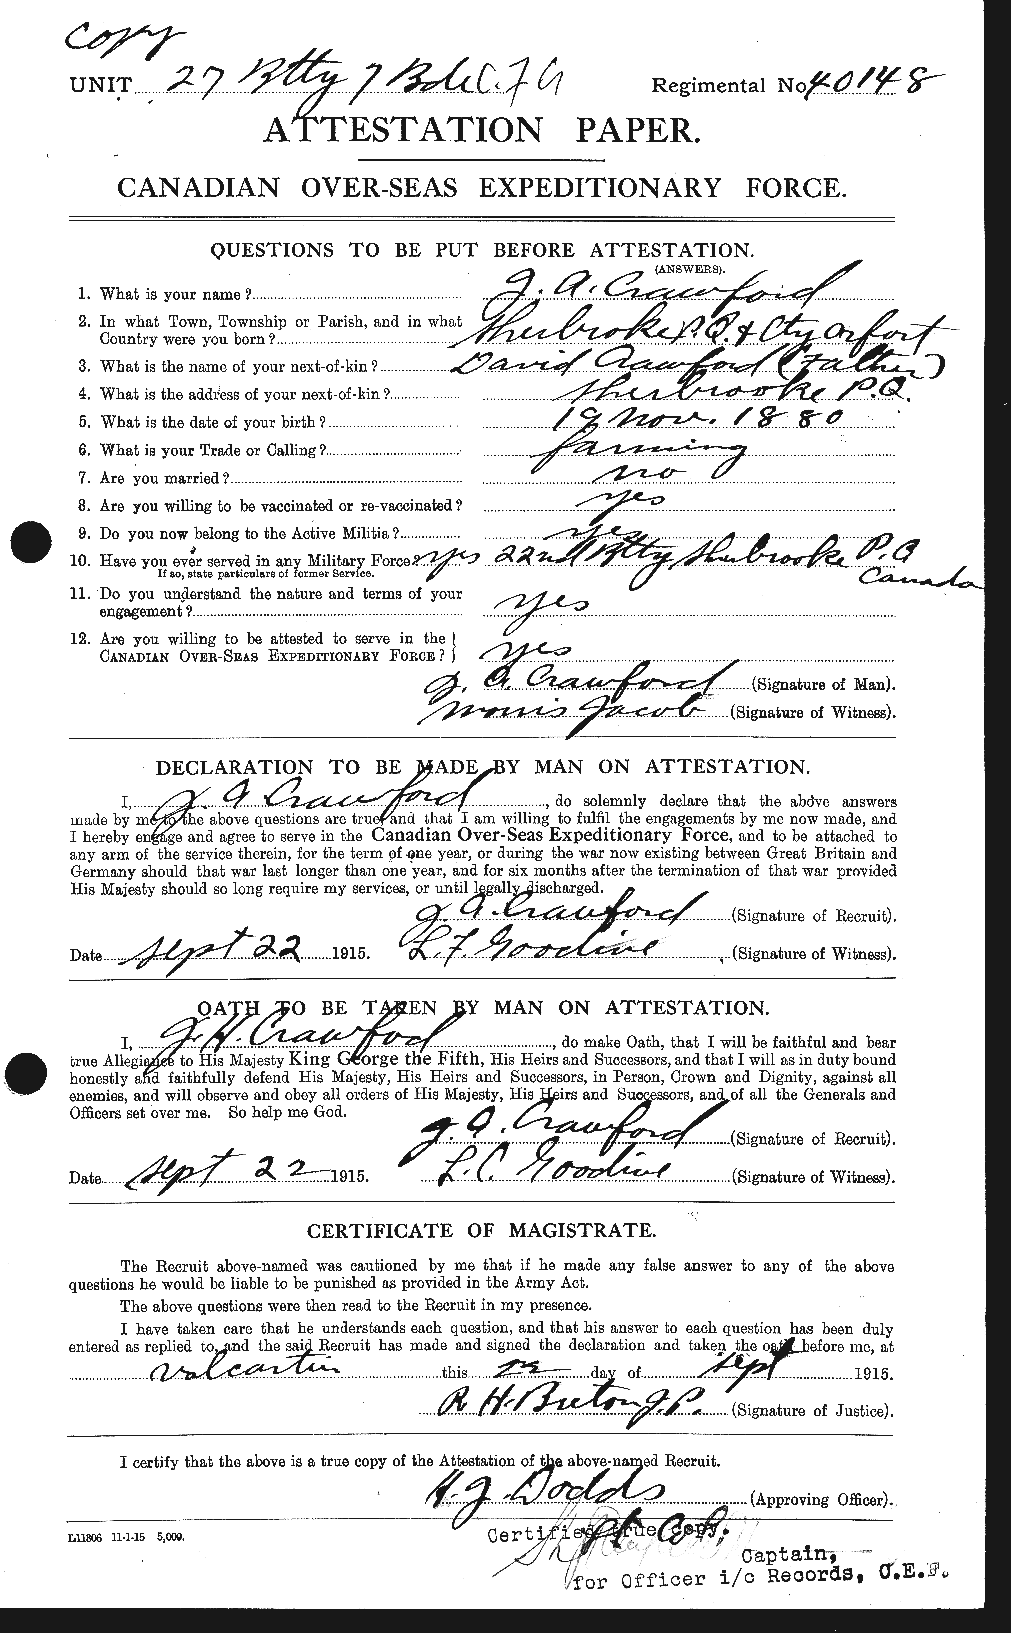 Personnel Records of the First World War - CEF 060553a